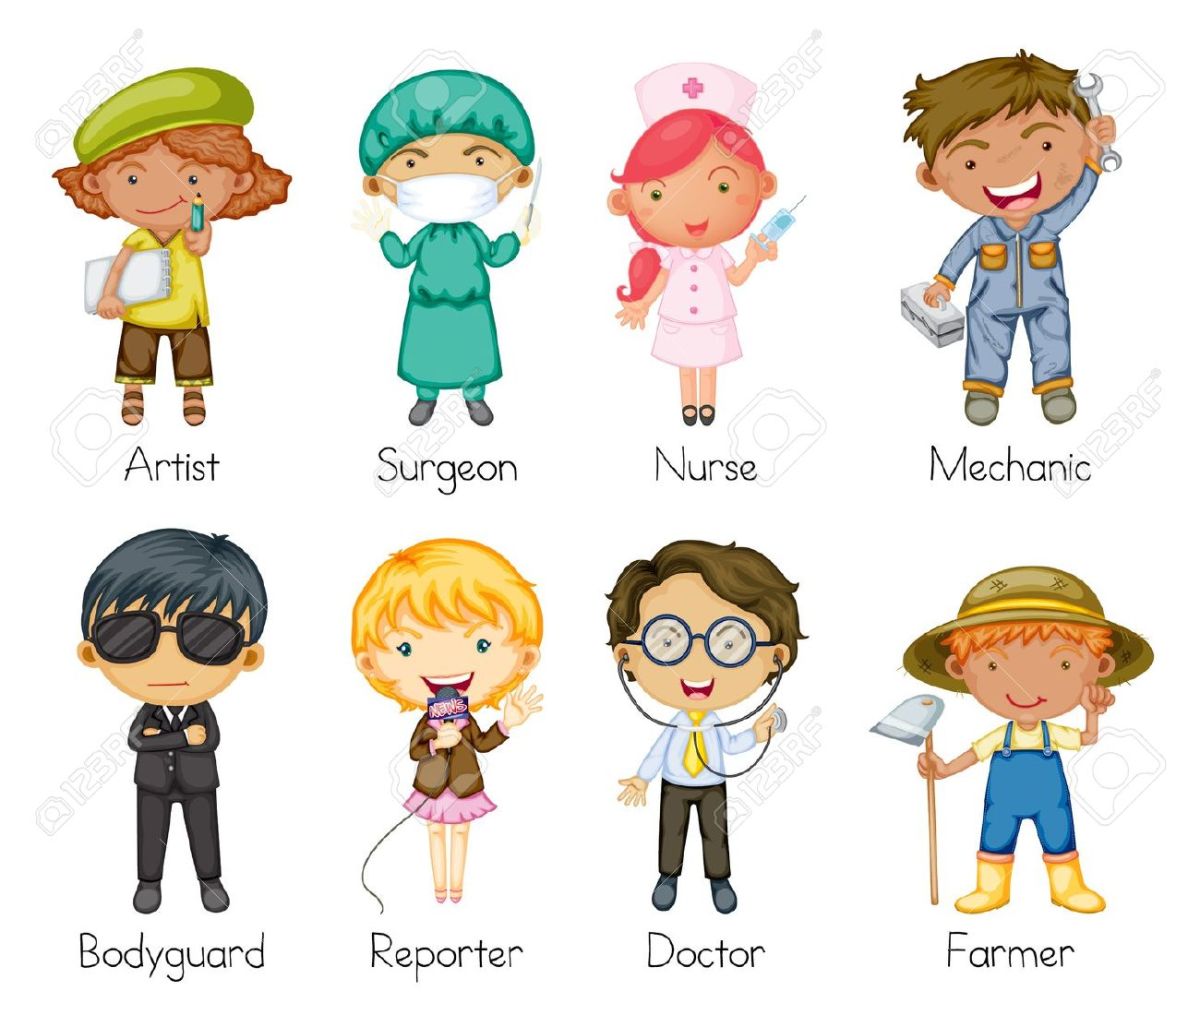 15913053-Illustration-of-a-jobs-and-professions-Stock-Vector-cartoon